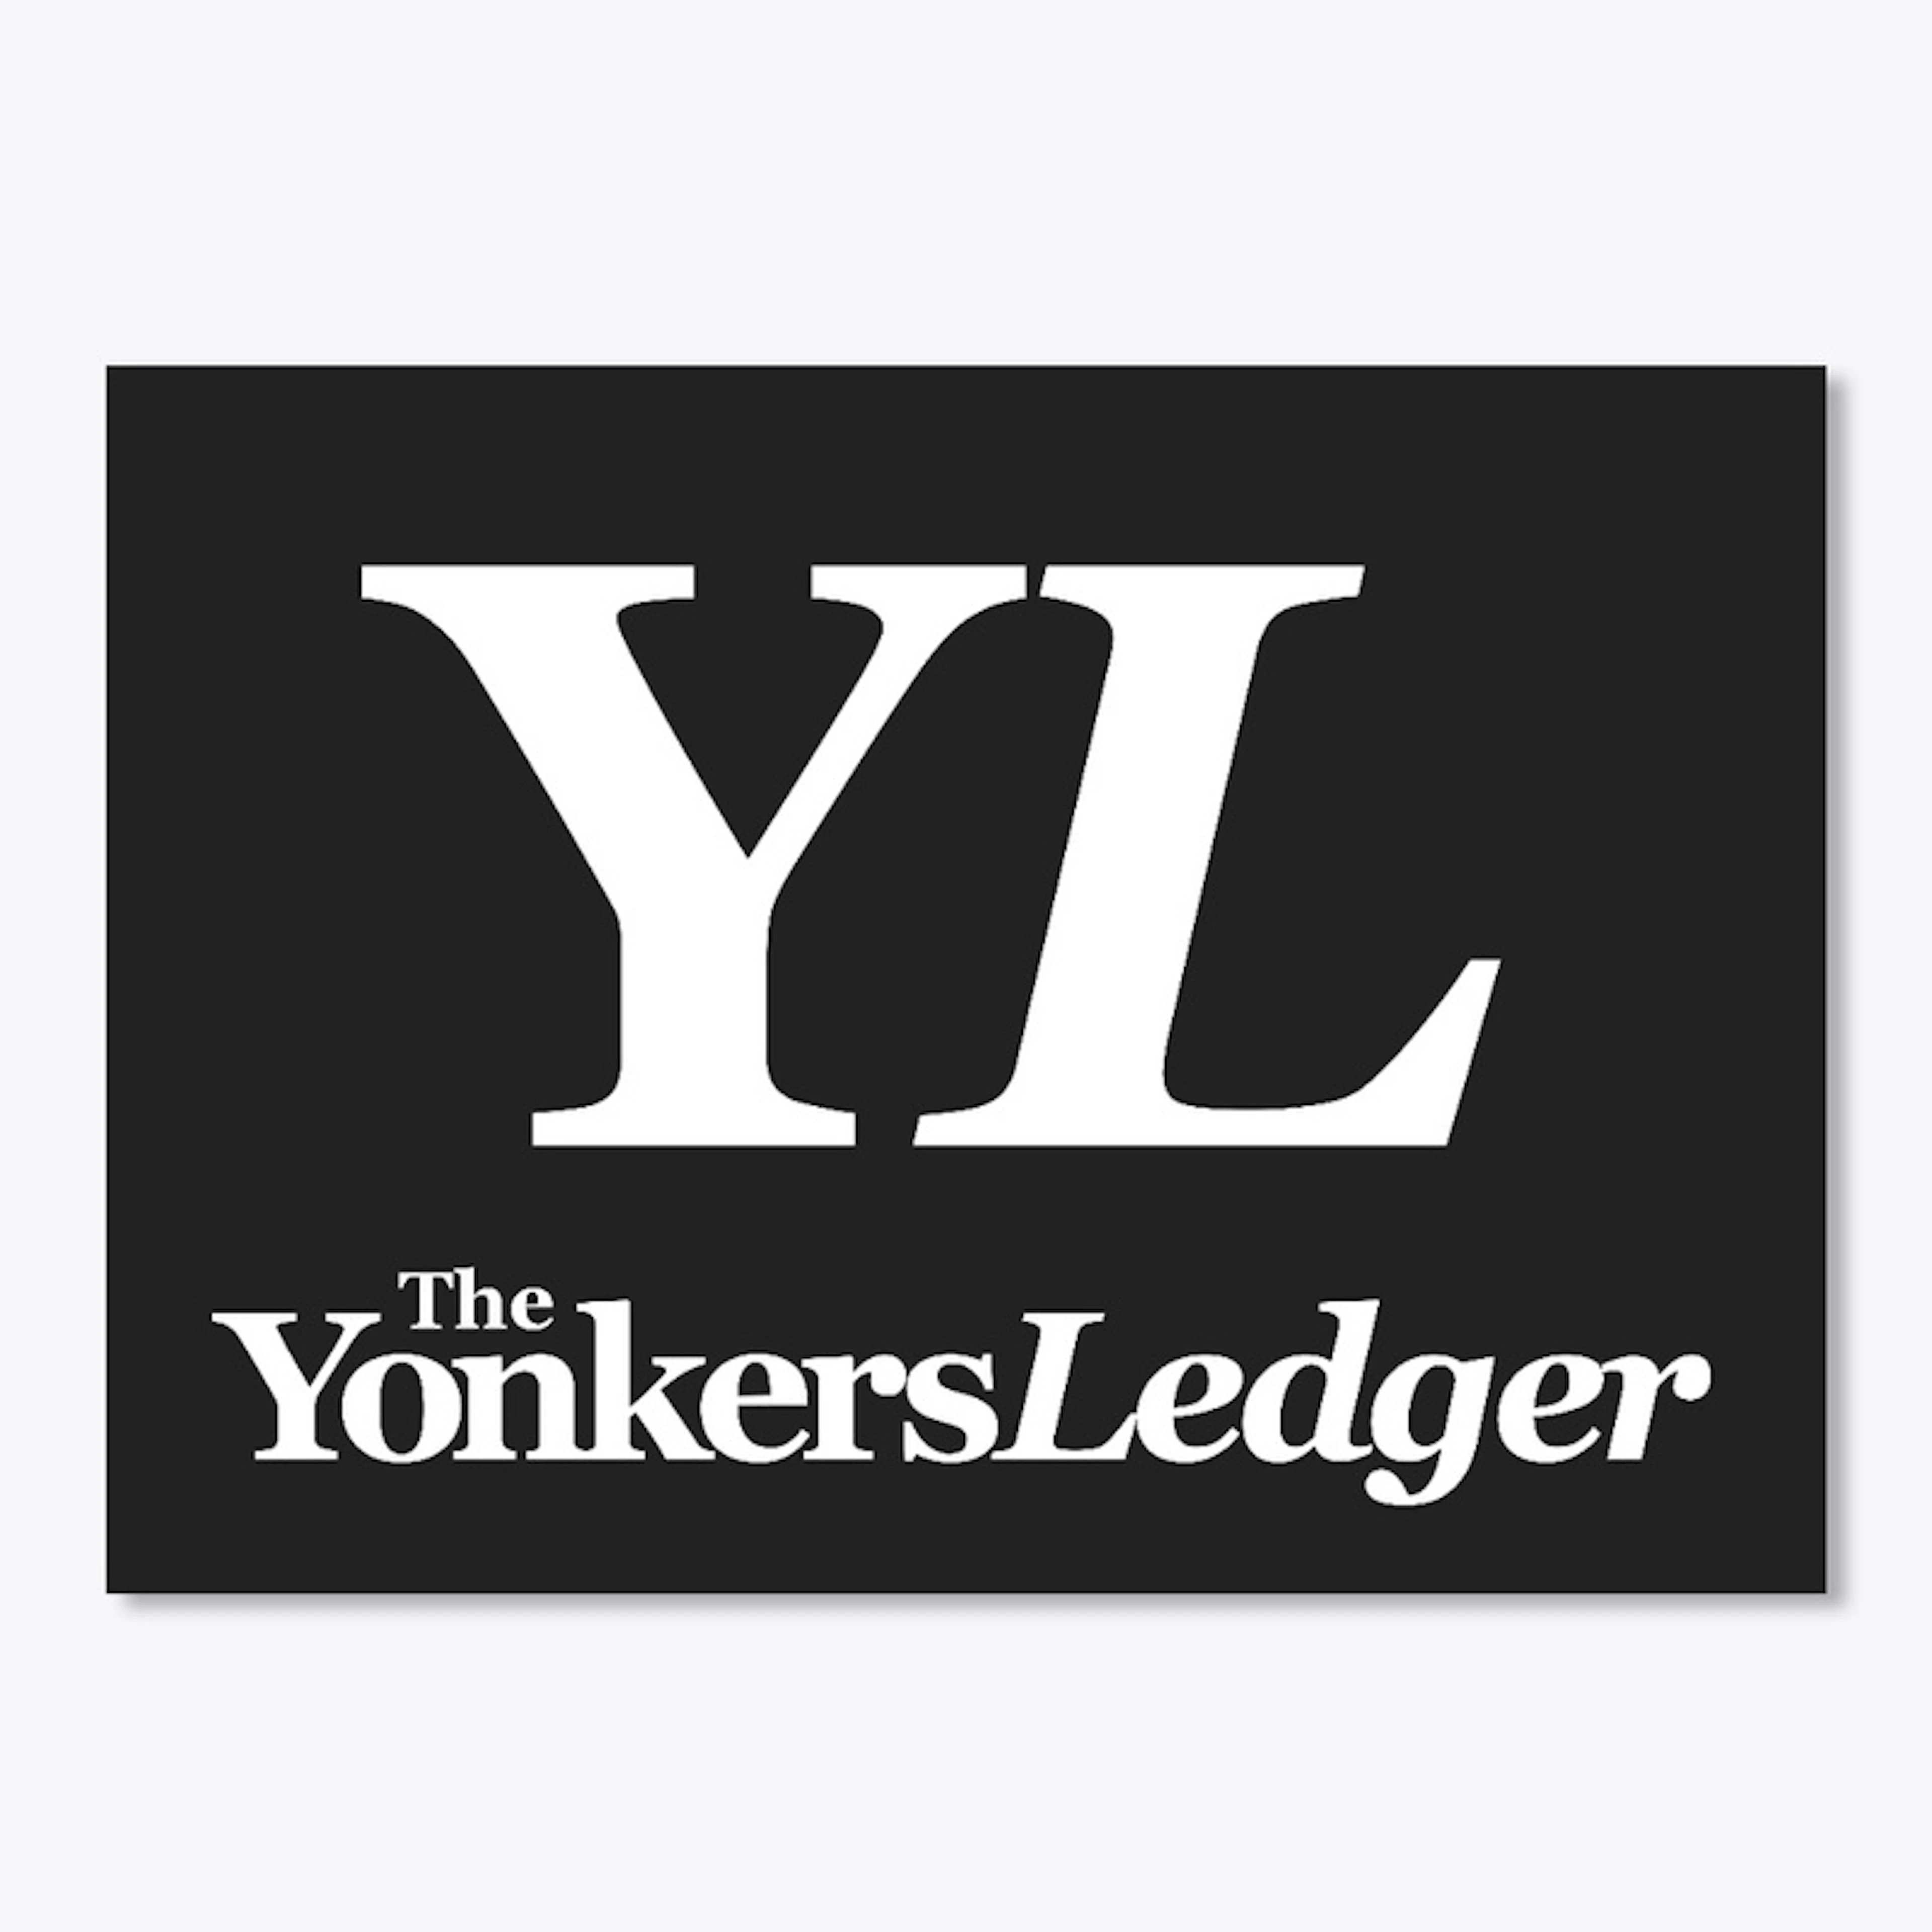 The Yonkers Ledger Sticker